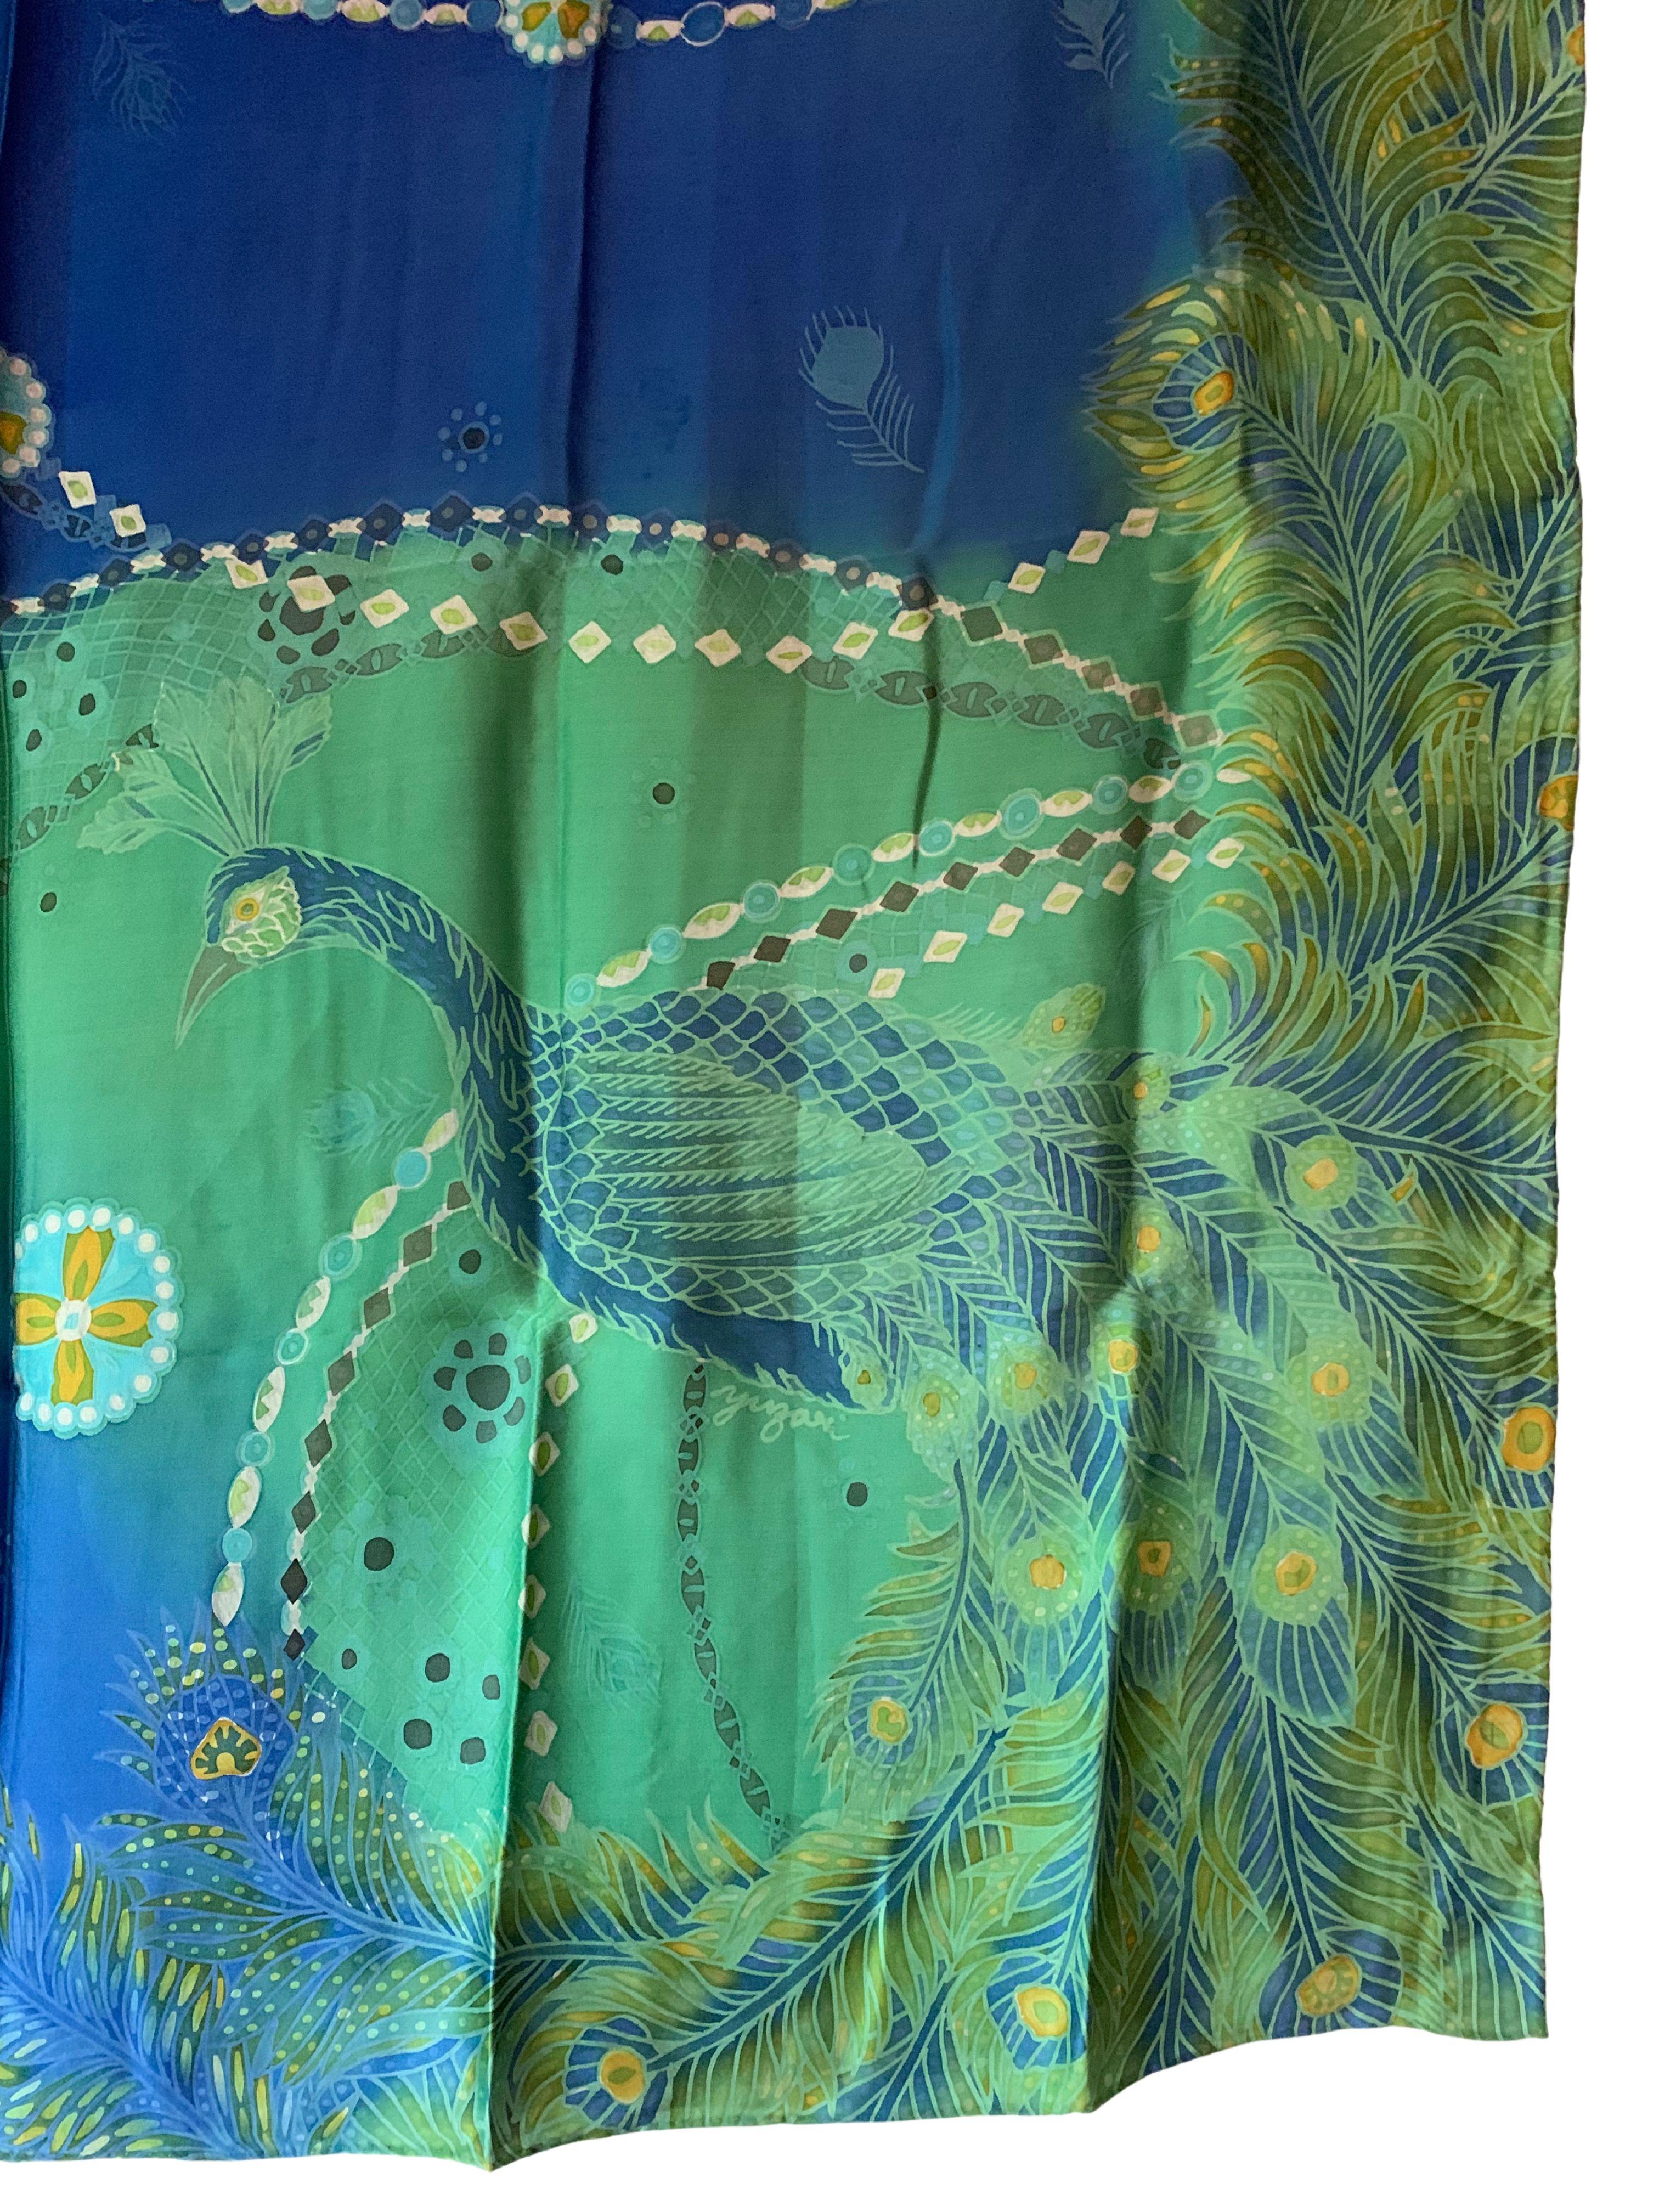 A wonderful Hand-Crafted Silk Textile from Malaysia with Stunning Detailing and shades. Central to this piece is the peacock on the bottom right corner. A wonderful decorative object to bring warmth and color to any space. This textile was